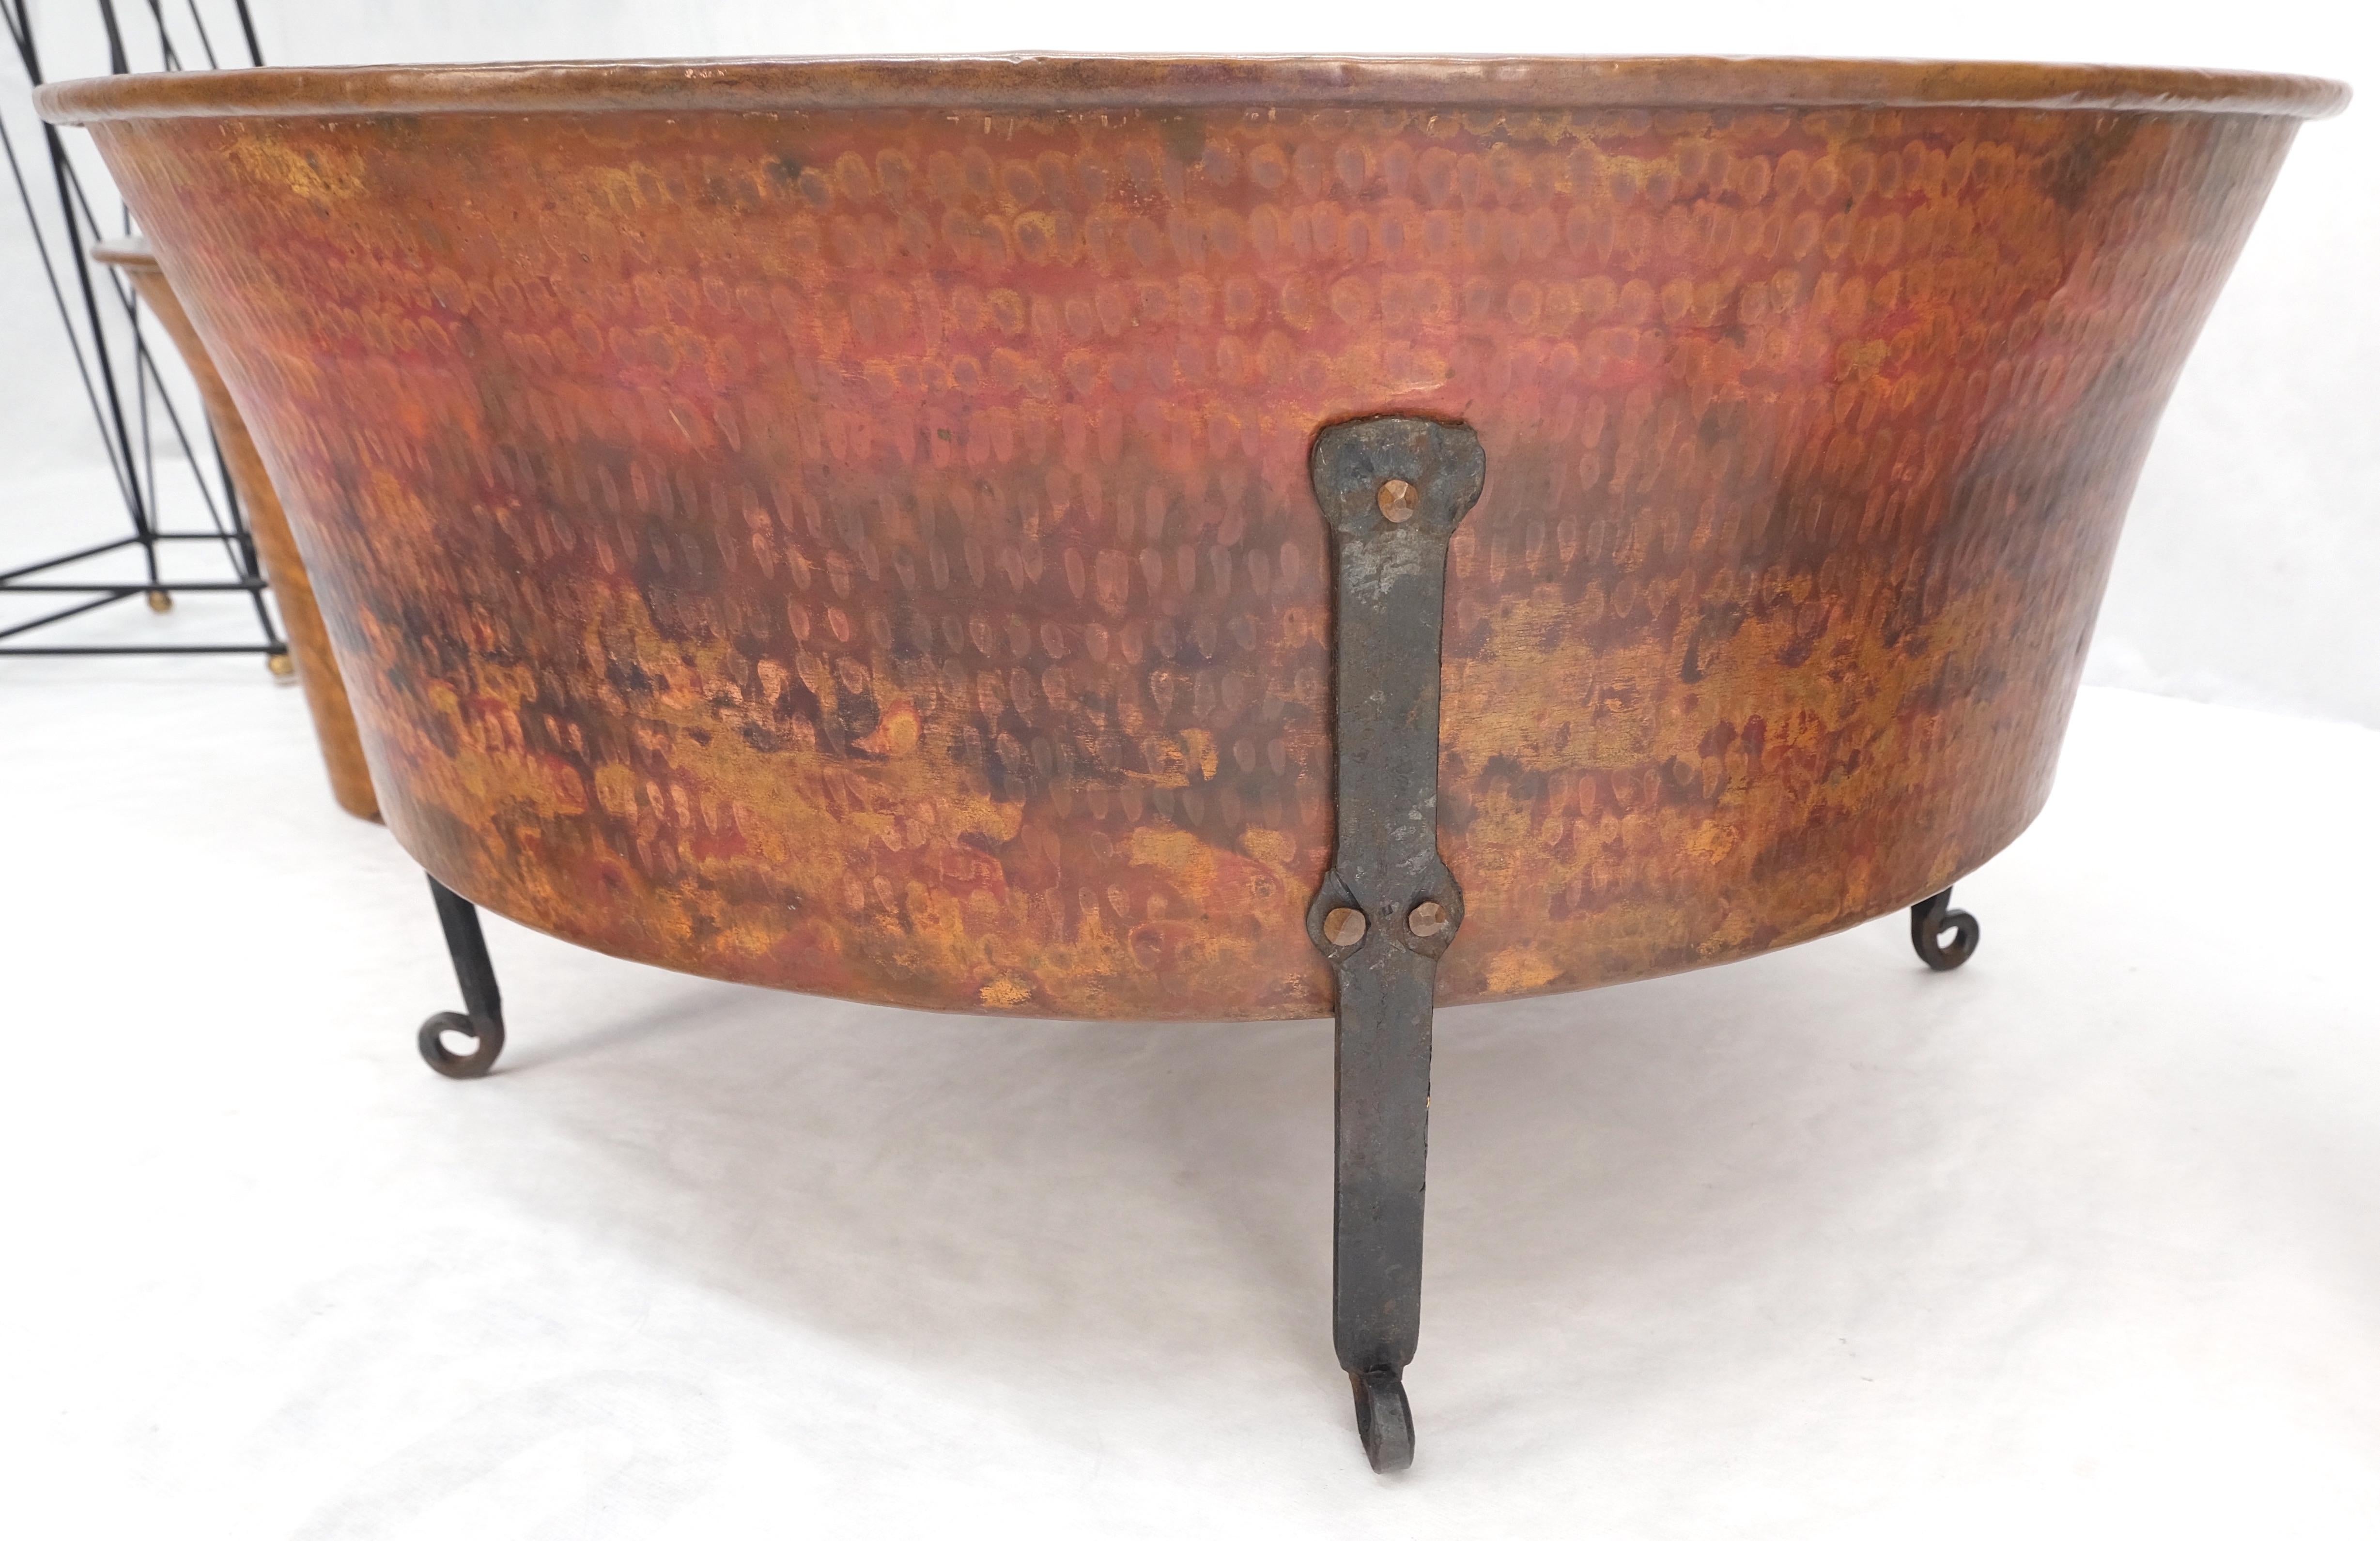 Vintage Hummered Forged Copper & Iron Round Coffee Table & Pair of Stools Seats In Good Condition For Sale In Rockaway, NJ